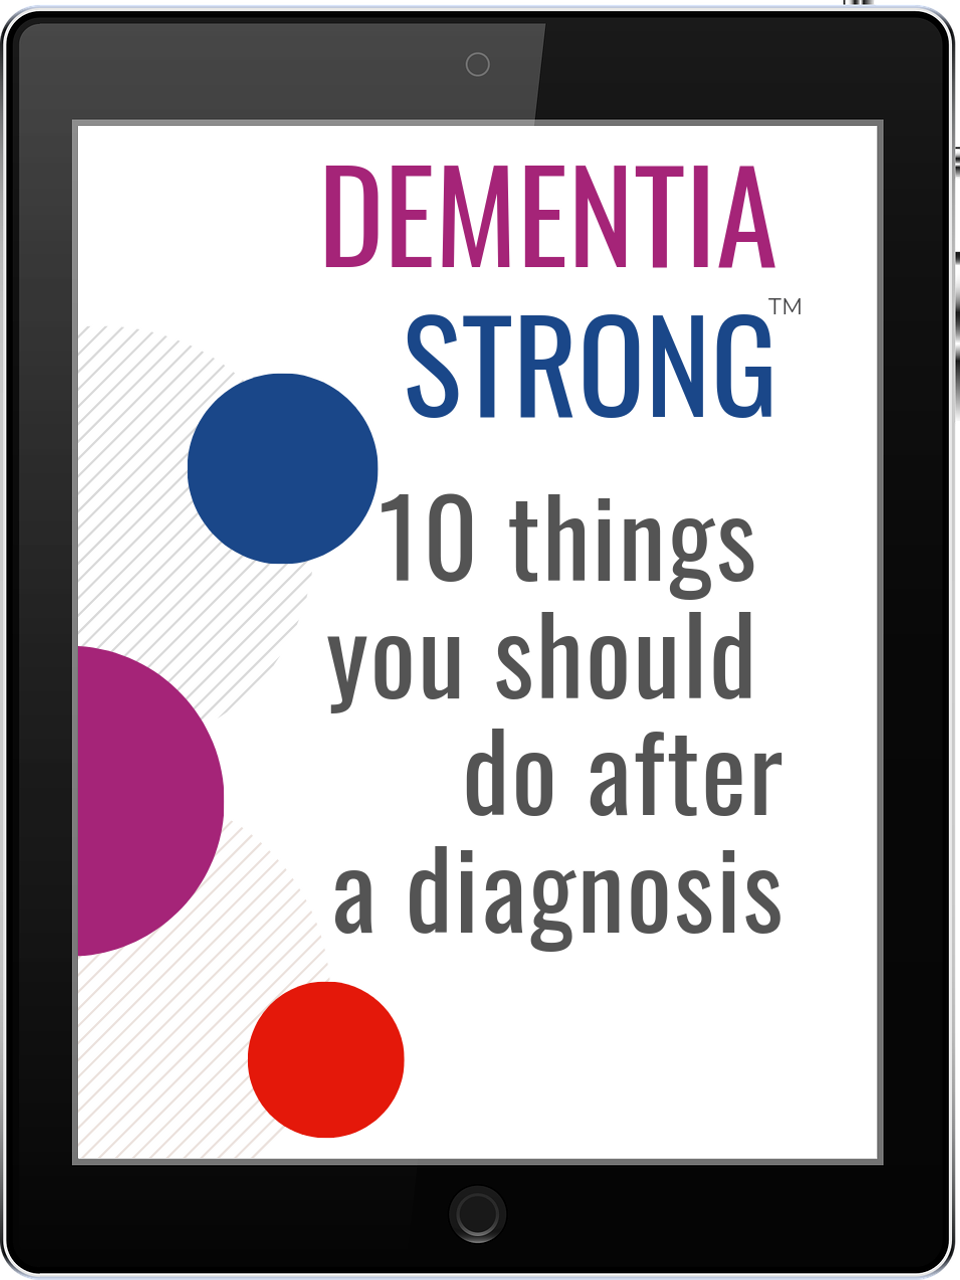 Dementia Strong, 10 Things You Should Do After a Diagnosis